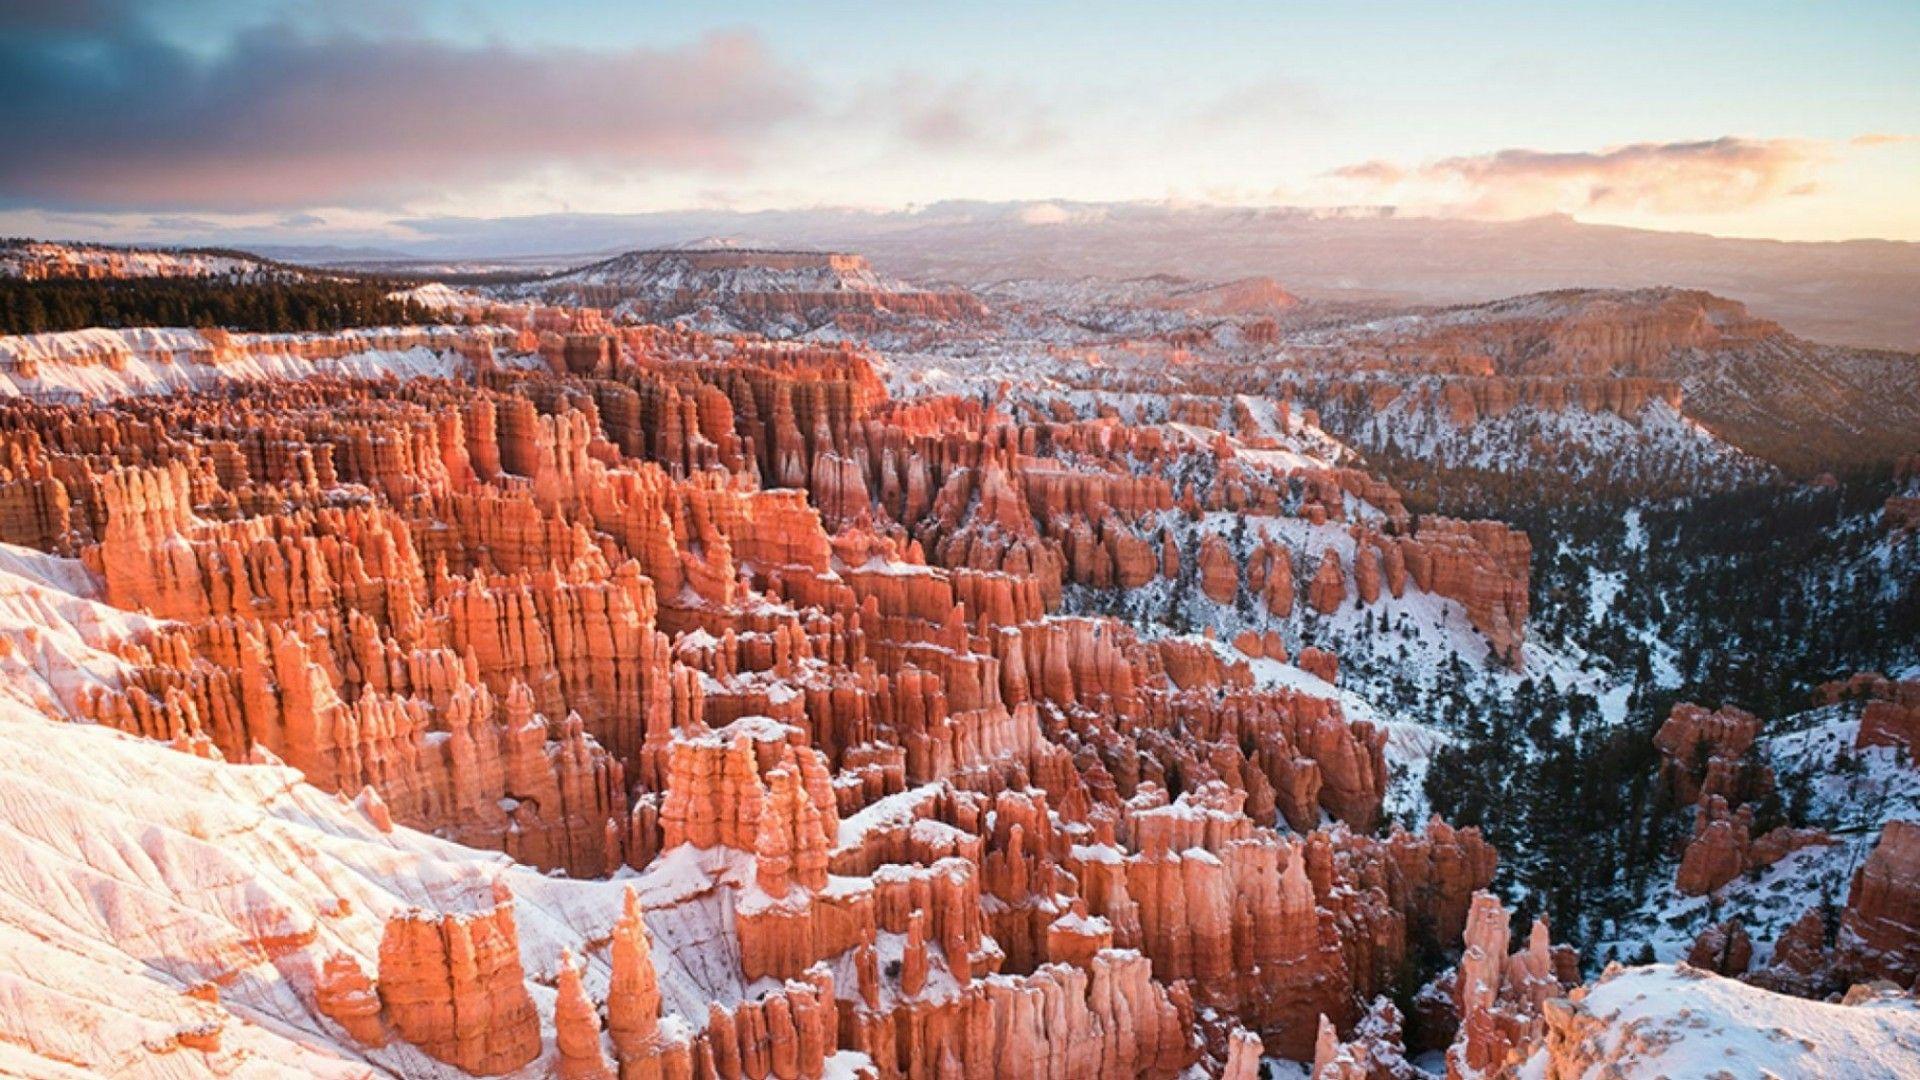 Winter Time In Bryce Canyon National Park Wallpaper. Wallpaper